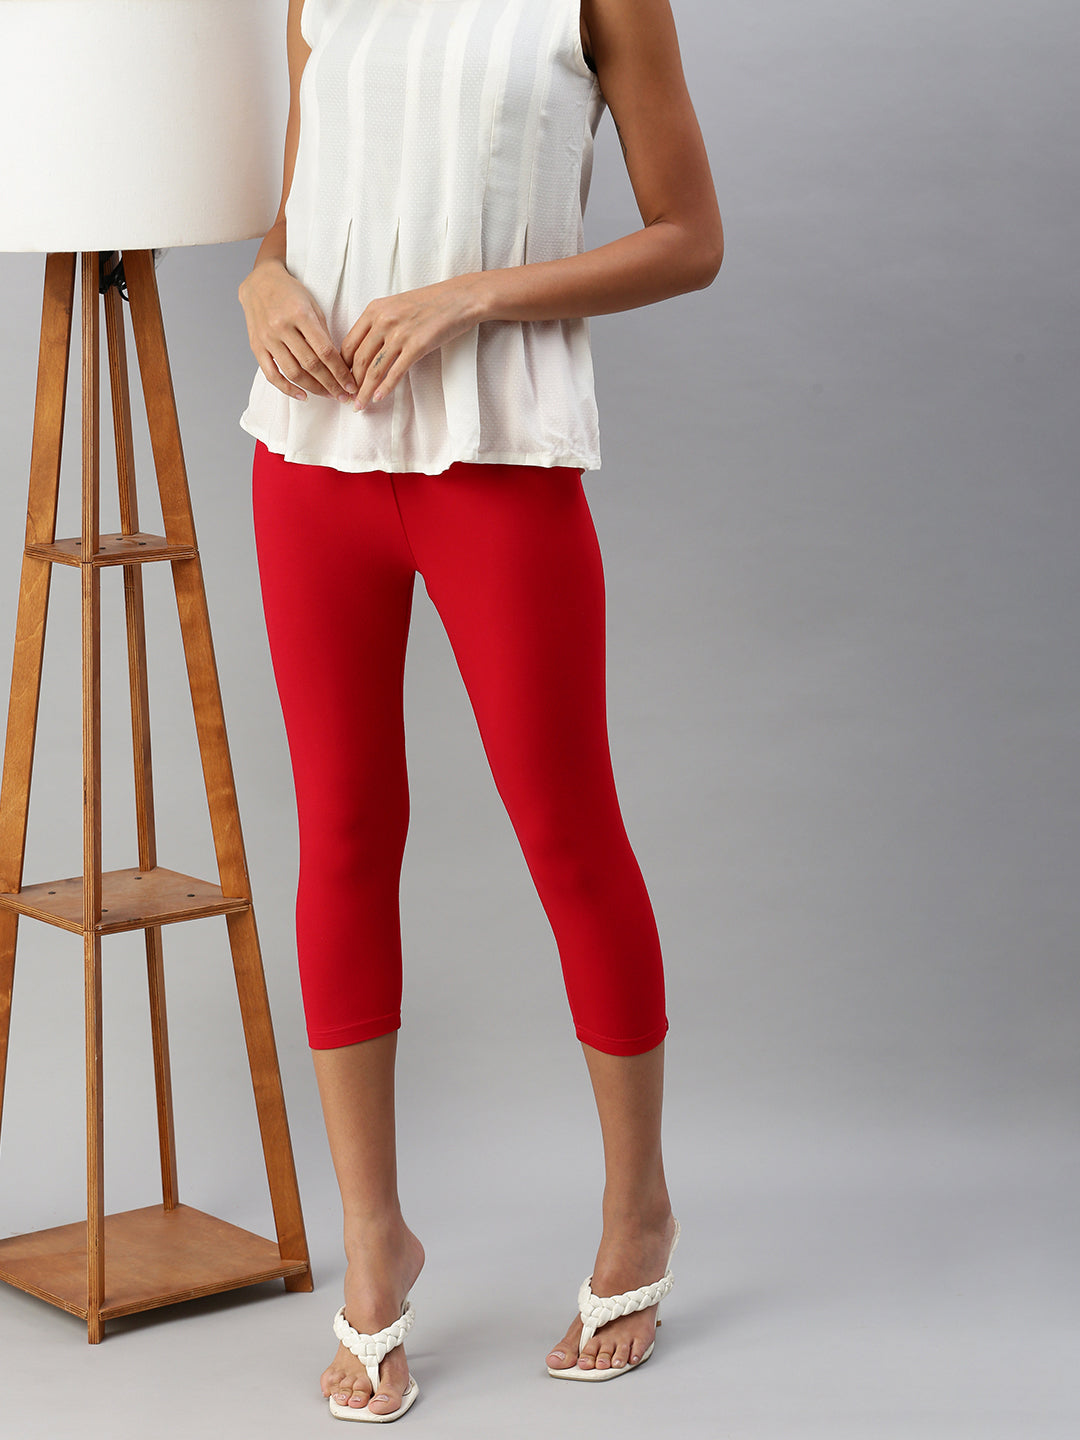 Shop Prisma's Apple Red Capri Leggings for Comfortable and Stylish Workout  Wear